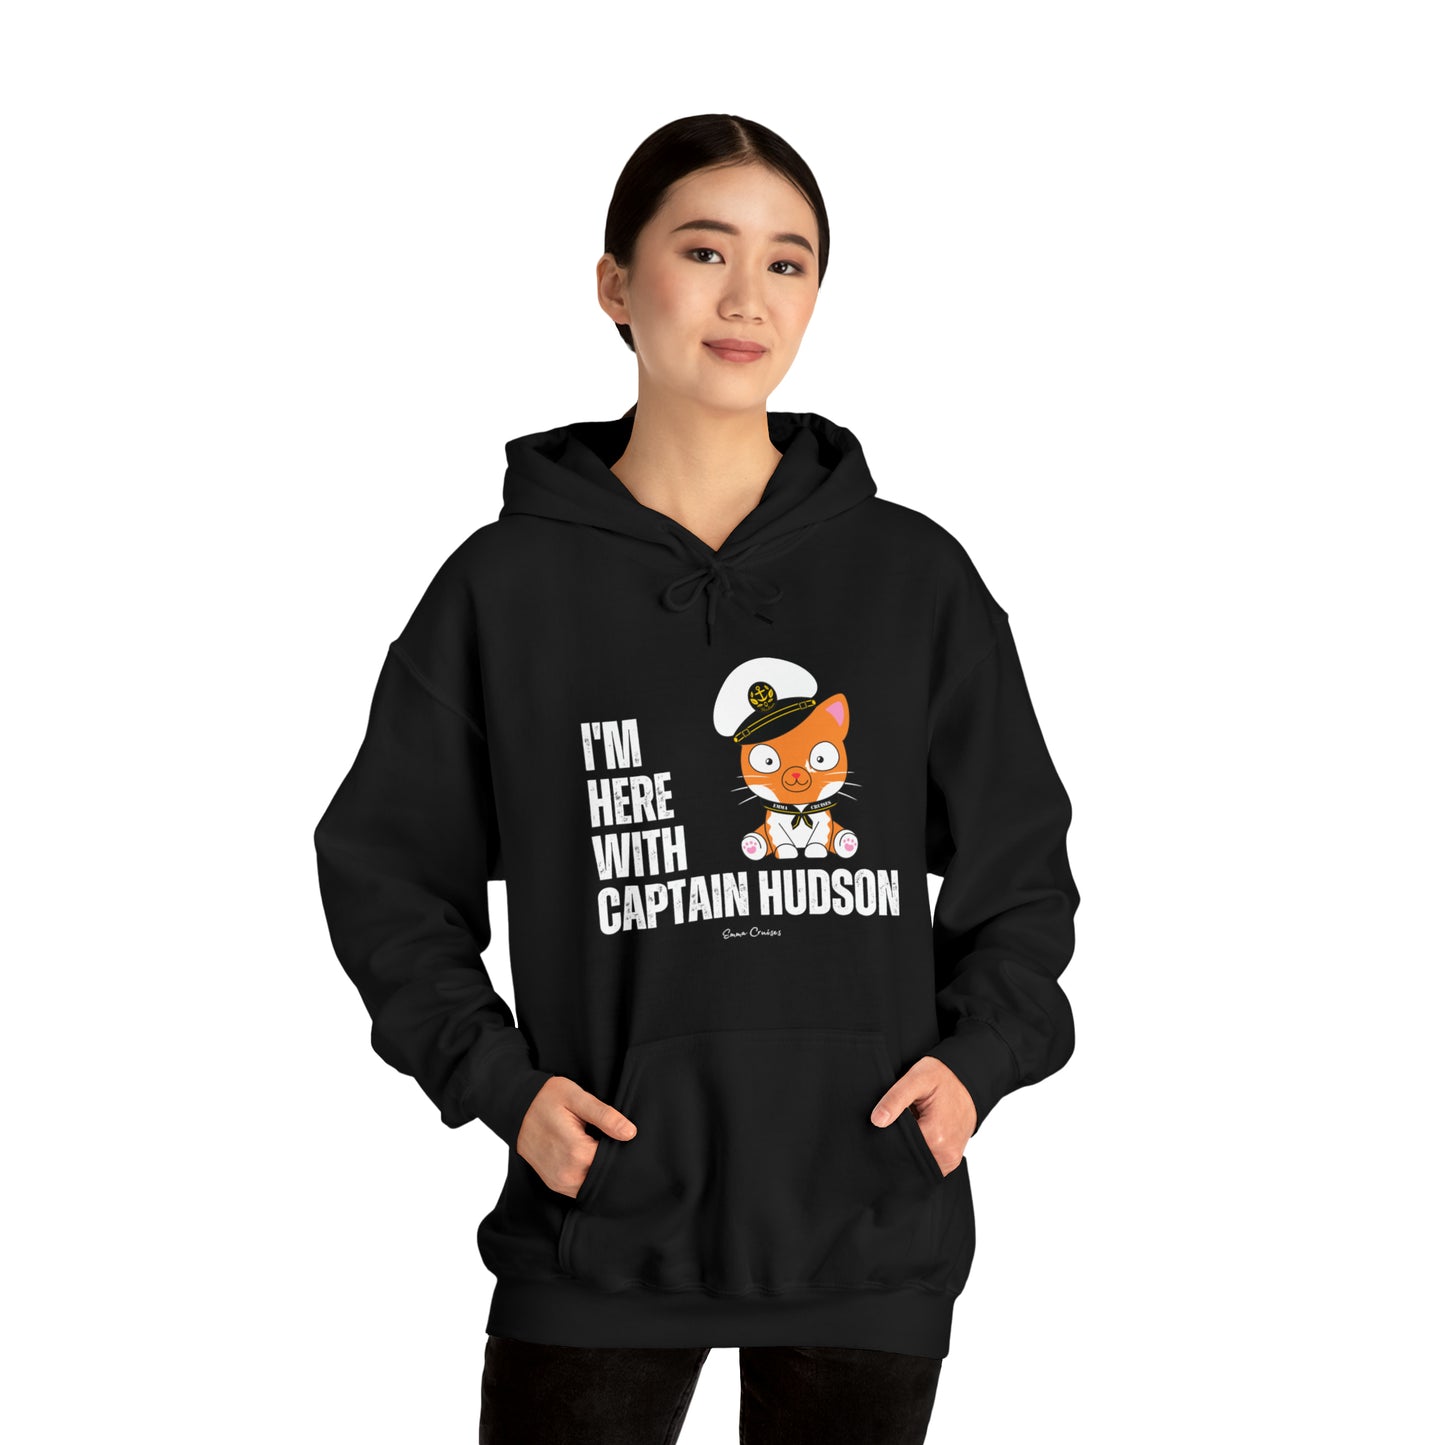 I'm With Captain Hudson - UNISEX Hoodie